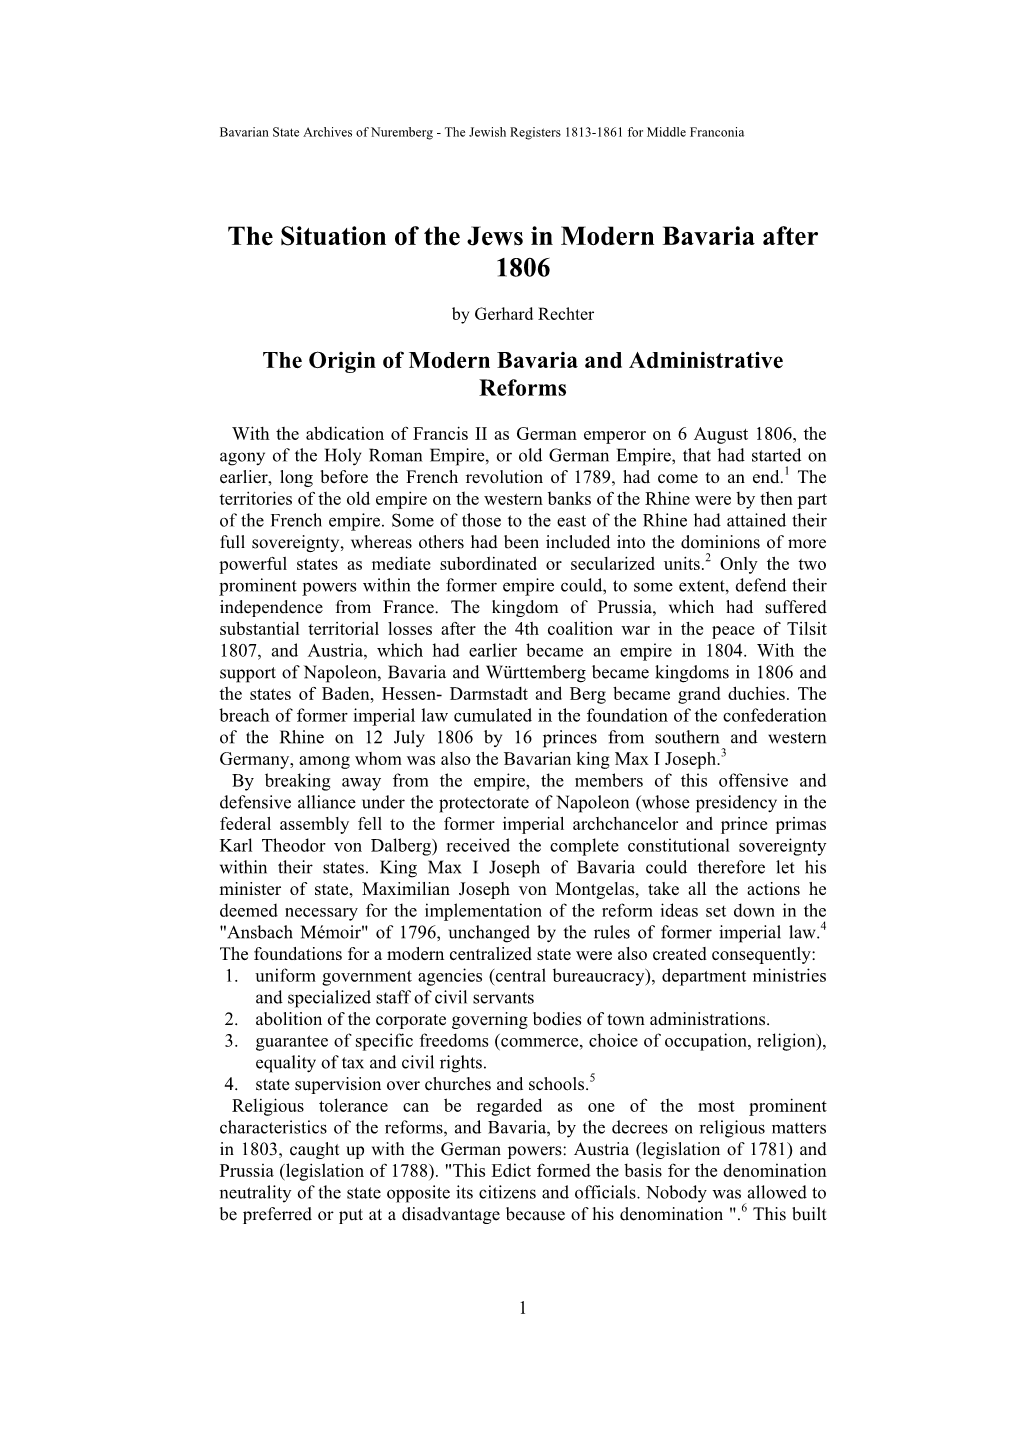 The Situation of the Jews in Modern Bavaria After 1806